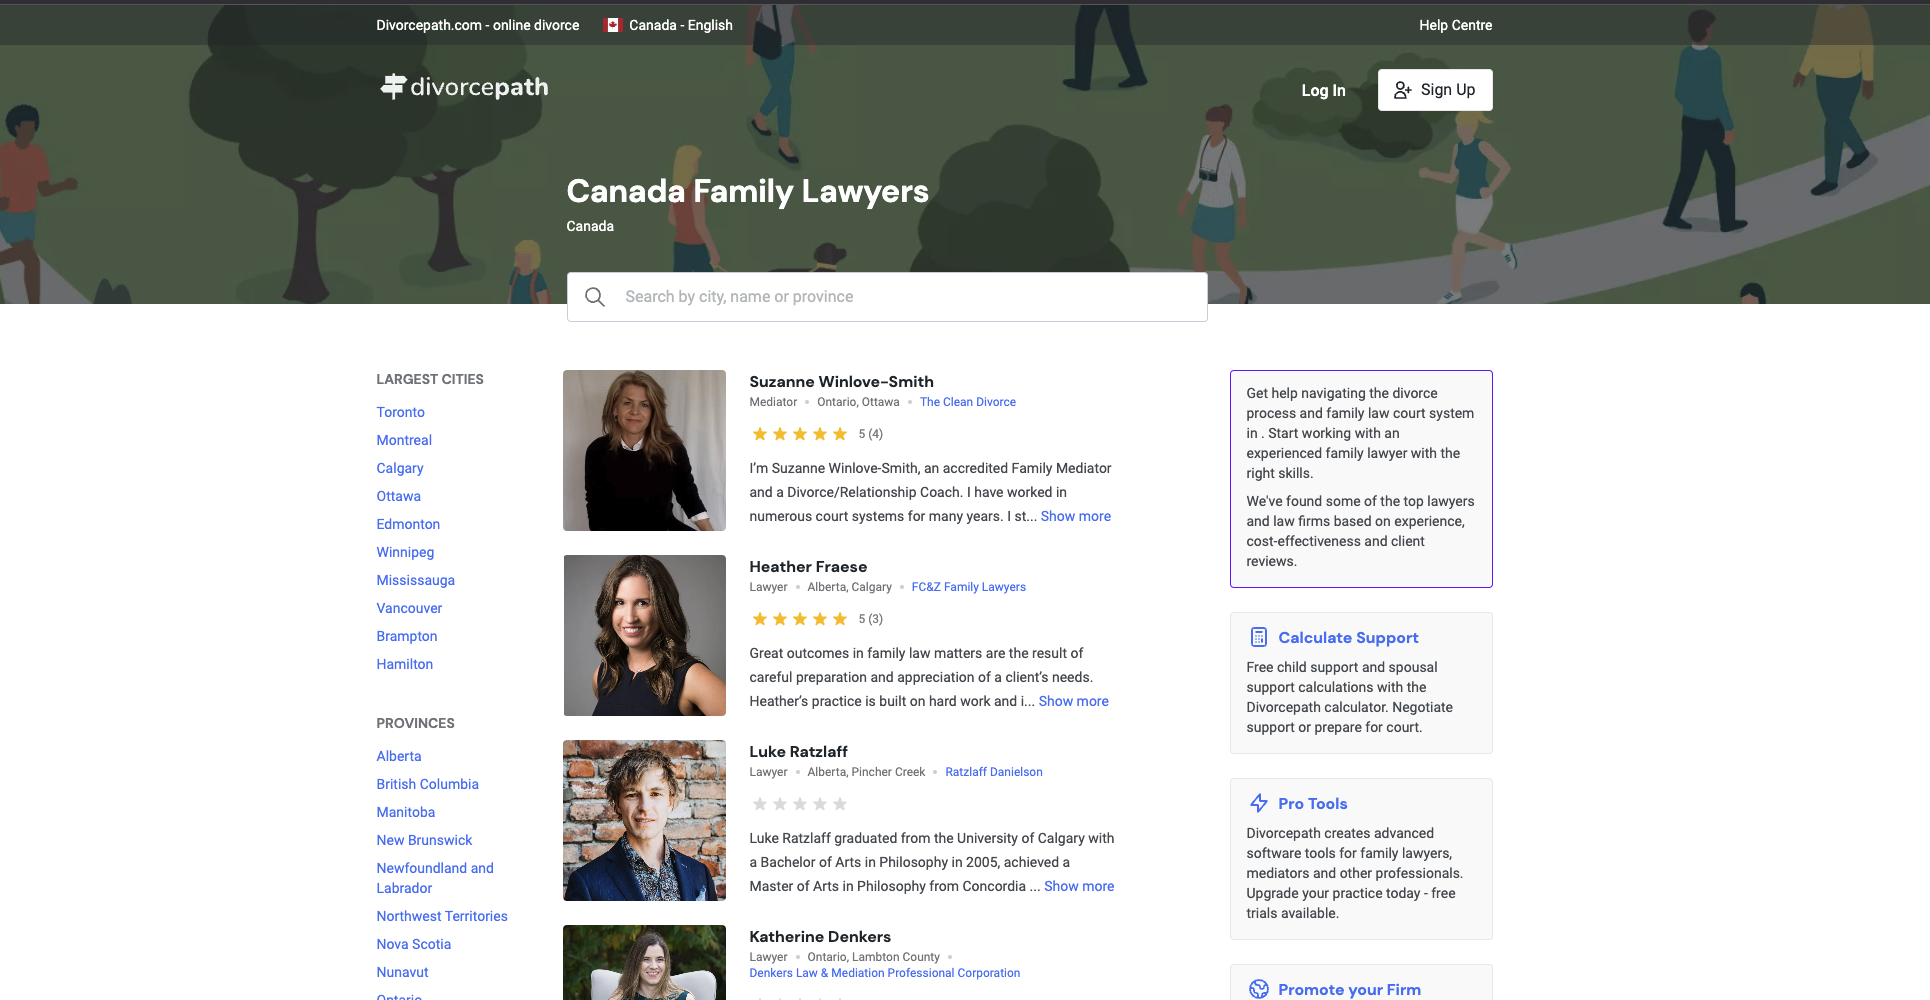 The Divorcepath Family Lawyer Directory